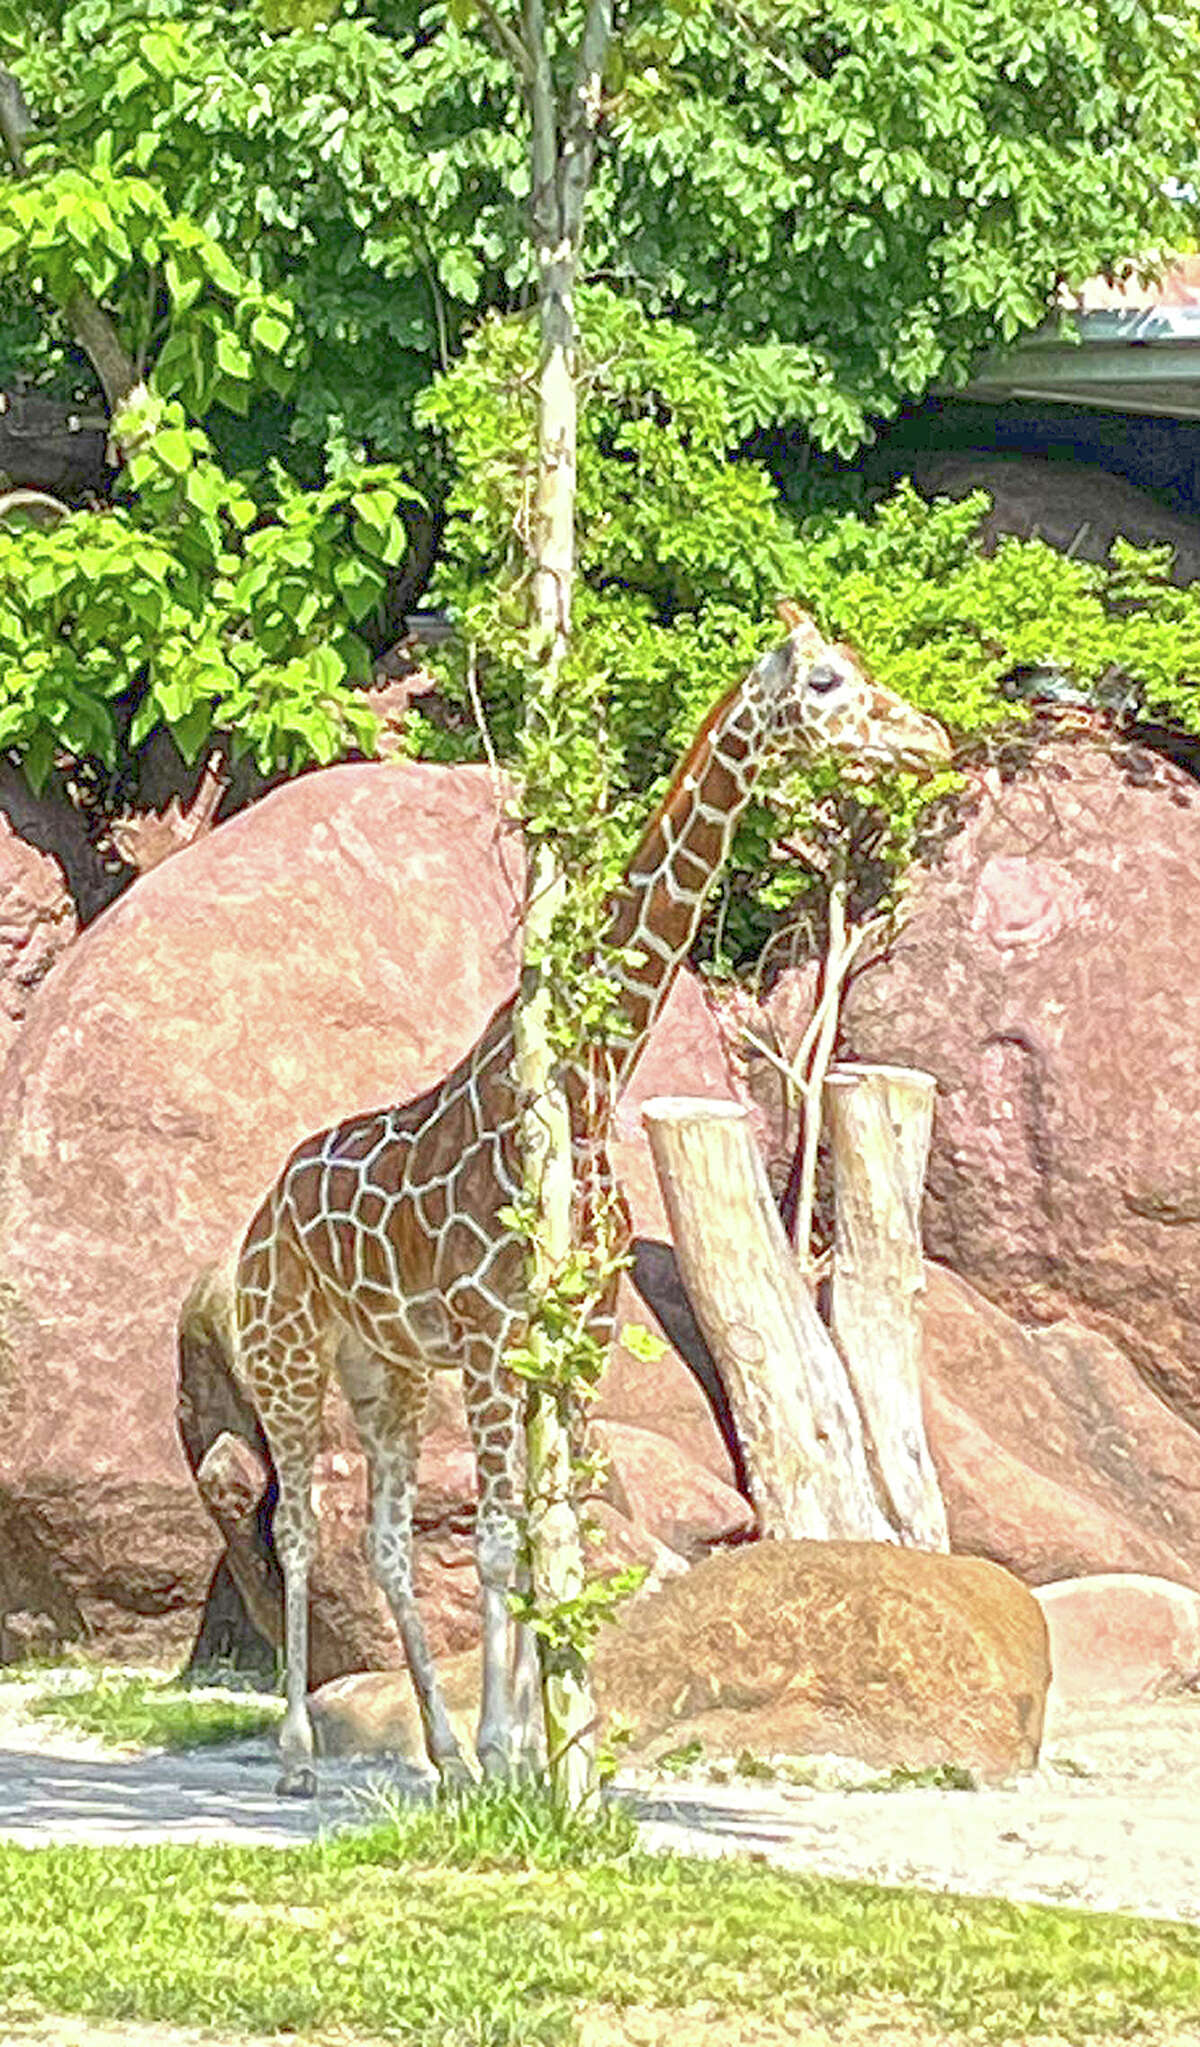 A giraffe tries its best to hide behind a thin tree at the St. Louis Zoo.